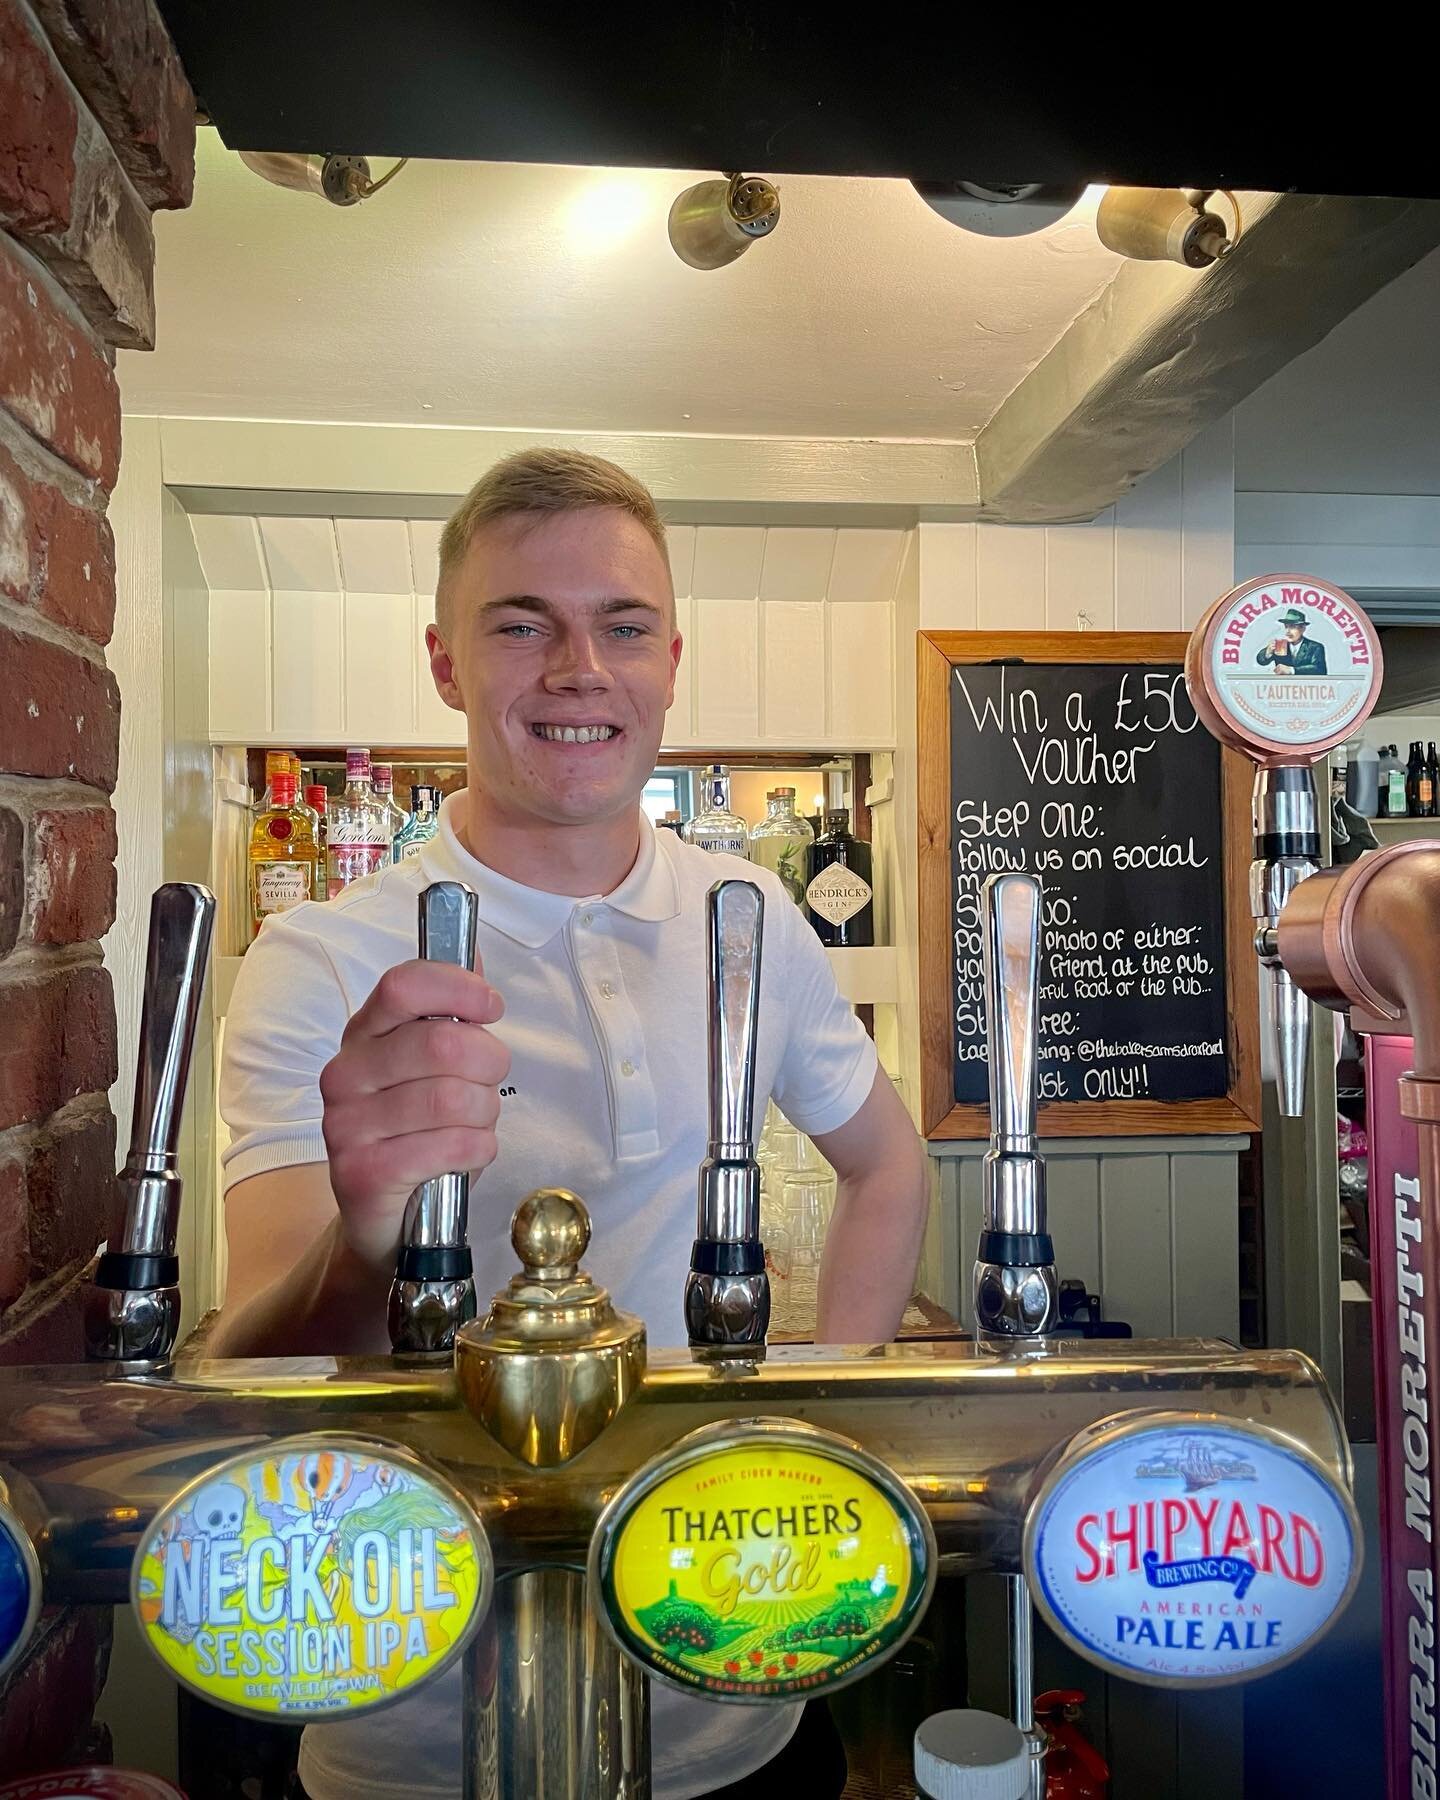 MEET THE TEAM‼️ Front of house Supervisor Nic, has been apart of our team for coming up to 3 years this November! 🤩 
-
-
So a bit about Nic&hellip;
Nic enjoys going on long road trips 🚘, visiting new pubs🍻 and enjoying the walks🚶🏼 that the area 